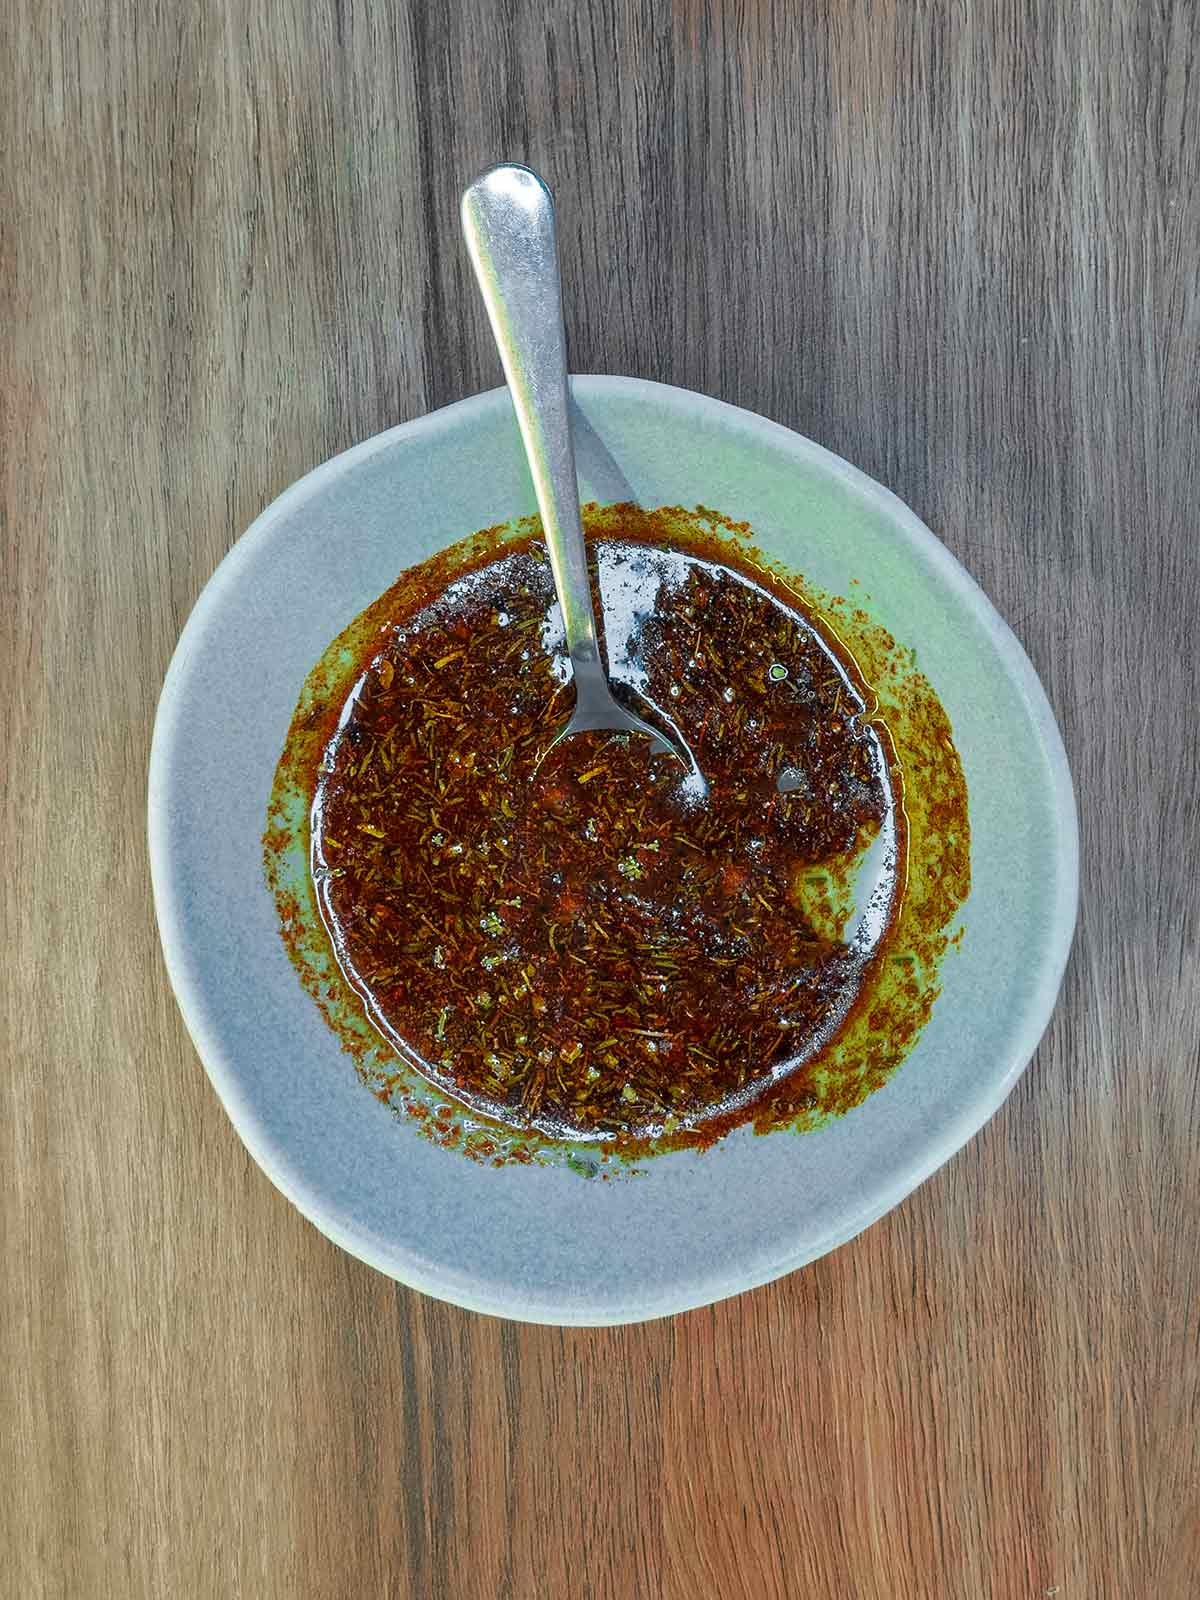 A small bowl containing a mixture of oil, herbs and spices.